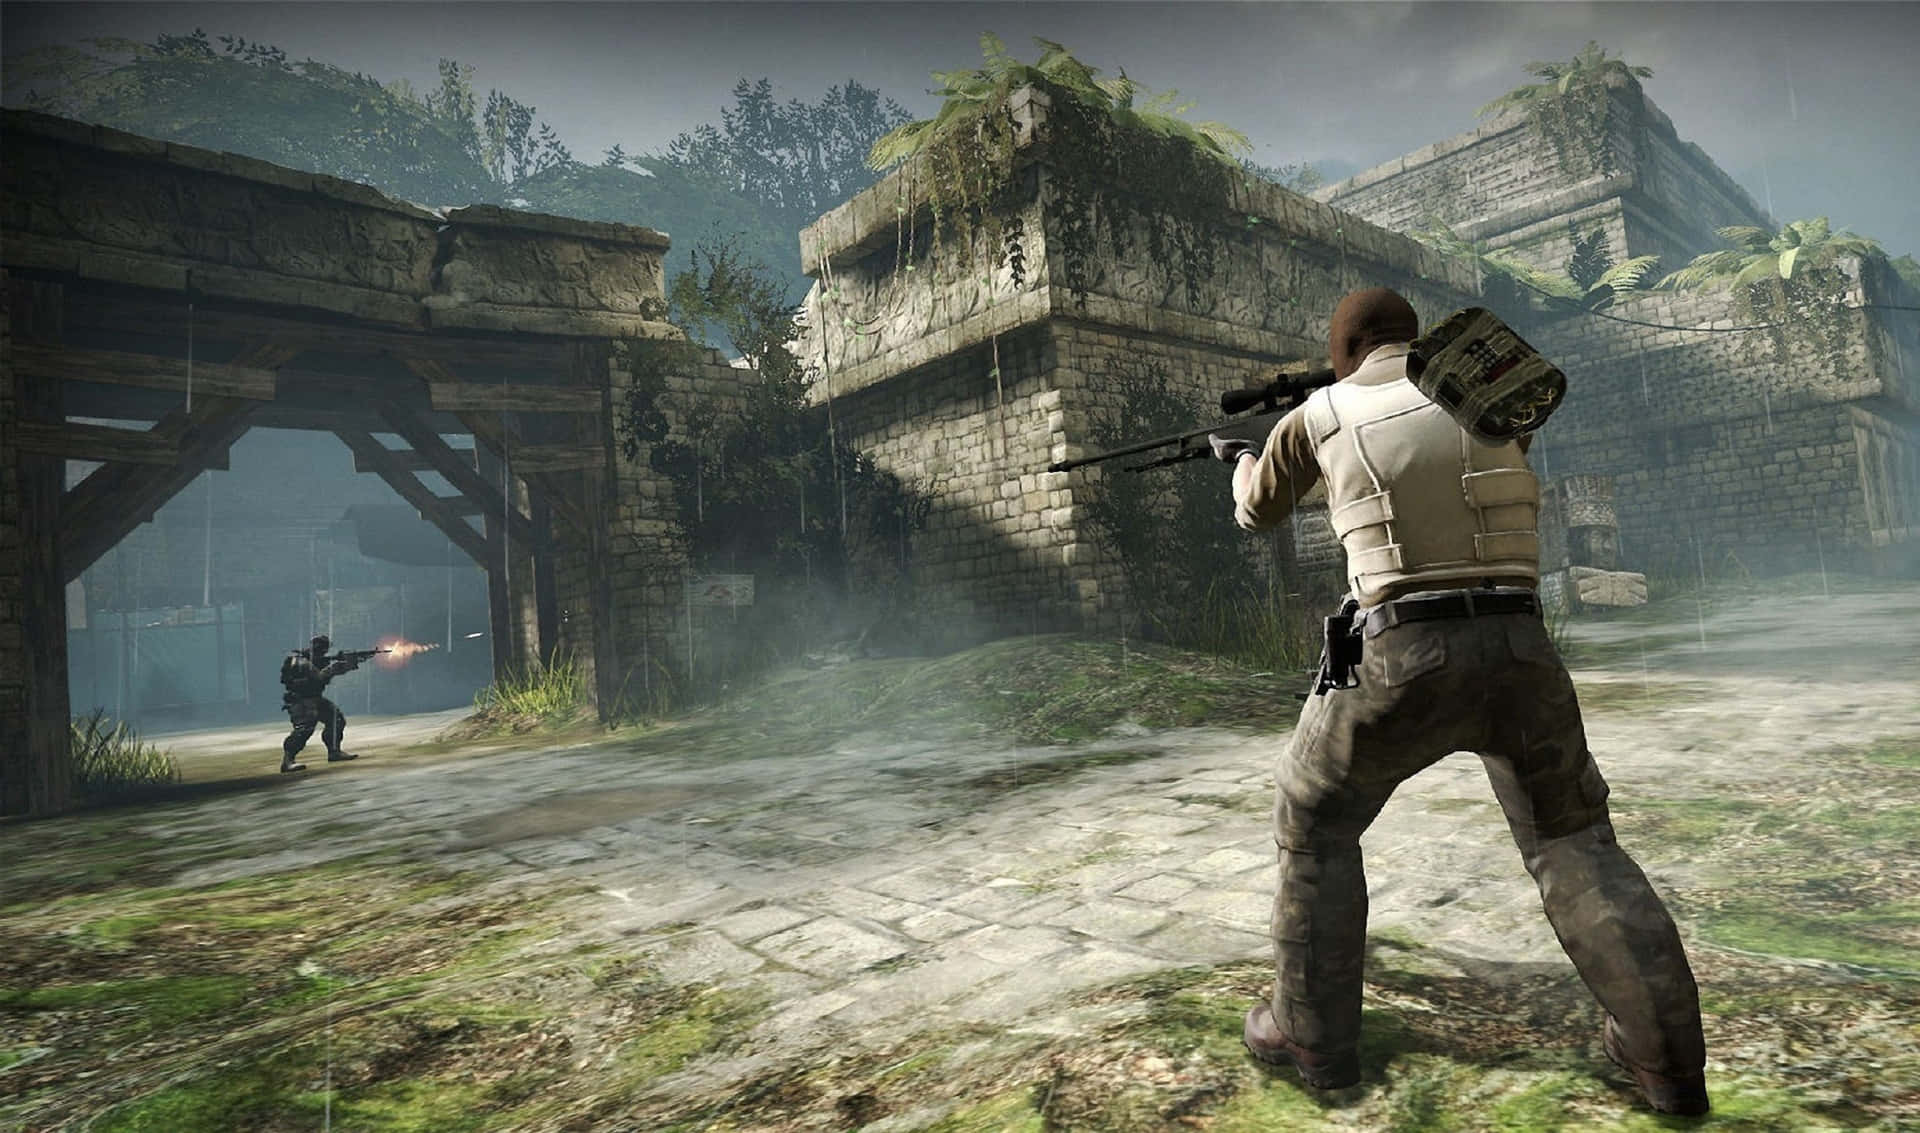 Challenge Yourself with Counter-Strike Global Offensive